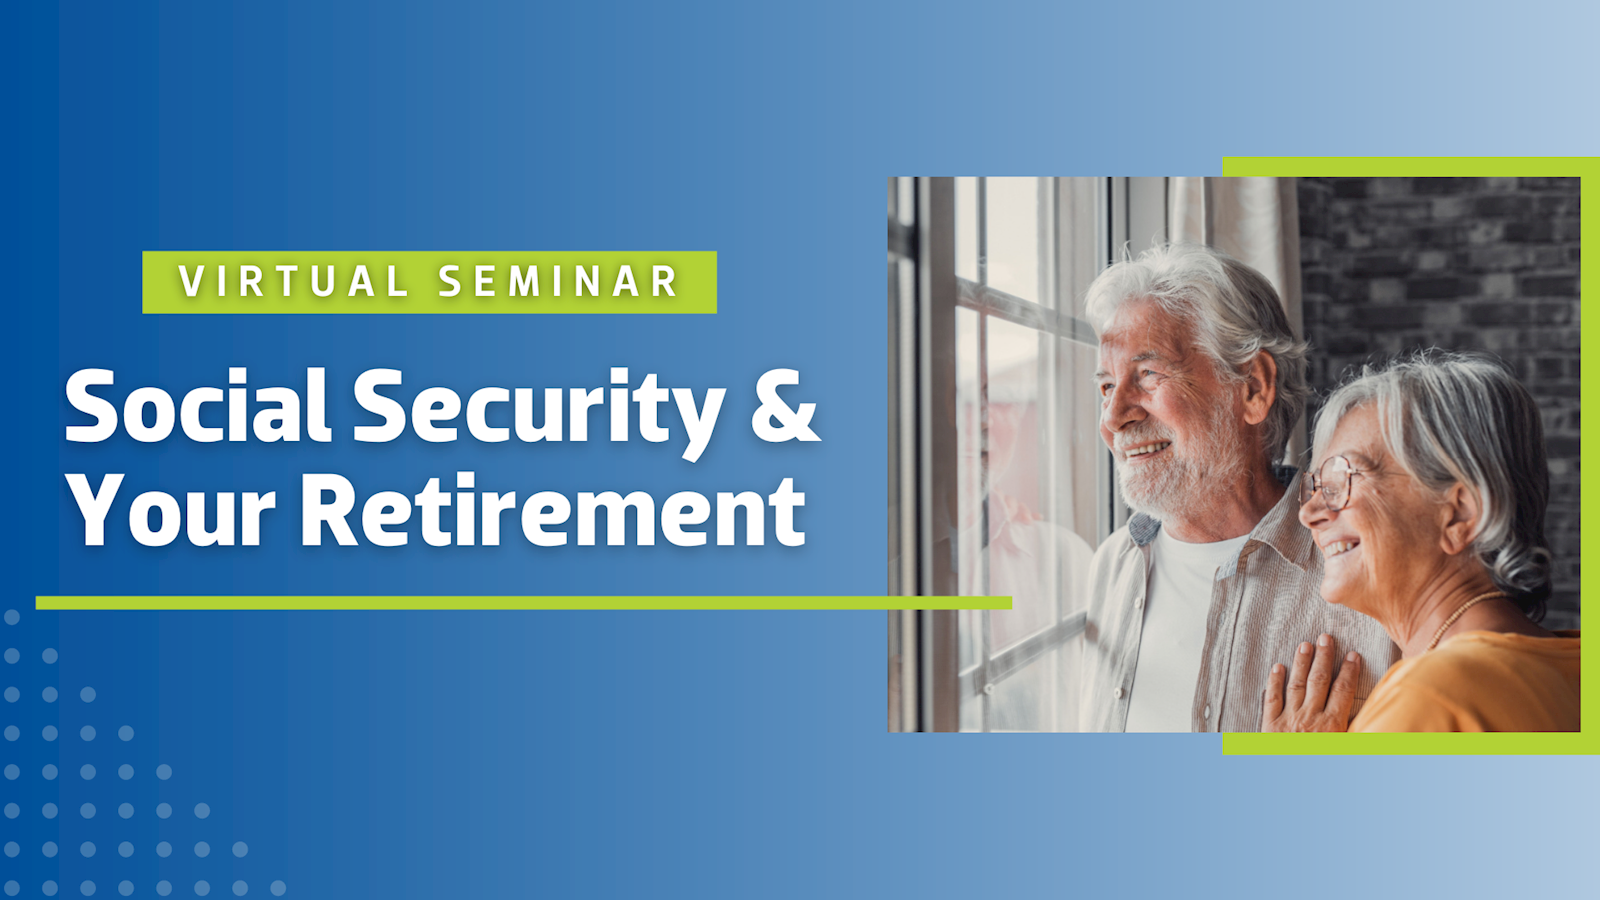 Social Security & Your Retirement